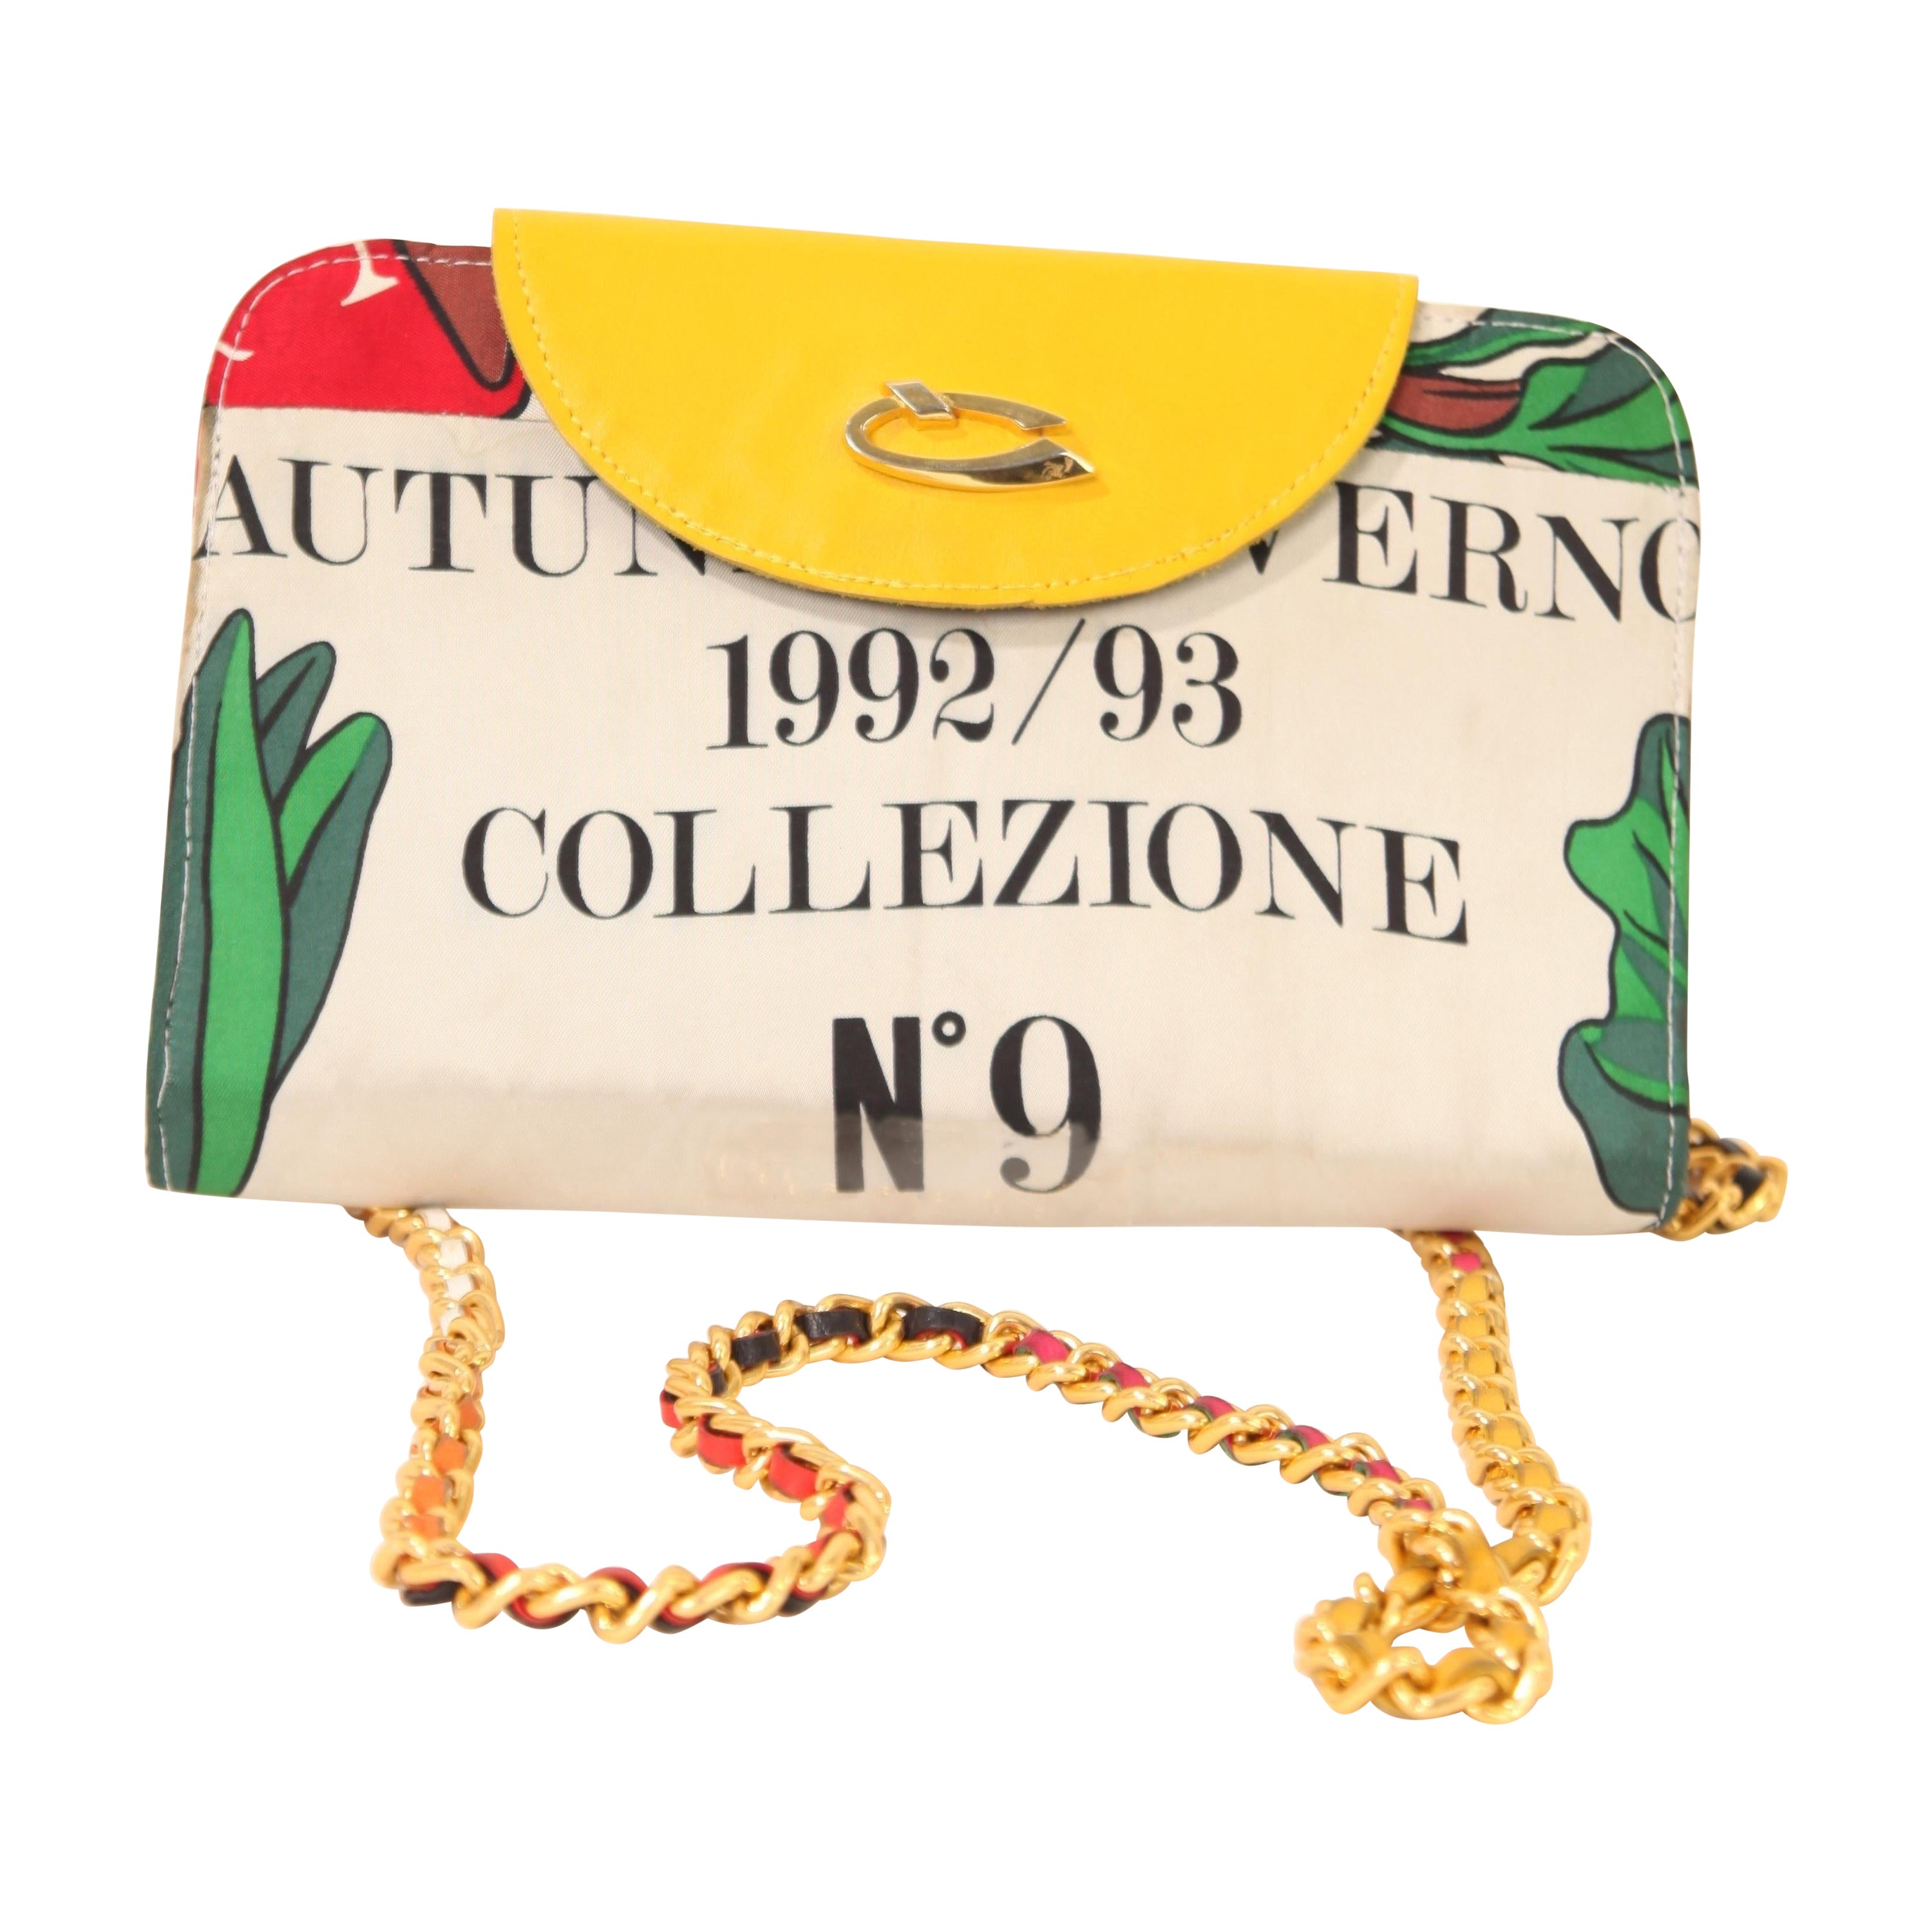 Moschino Cheap and Chic multicolour leather and textiles  clutch bag. C1992 For Sale